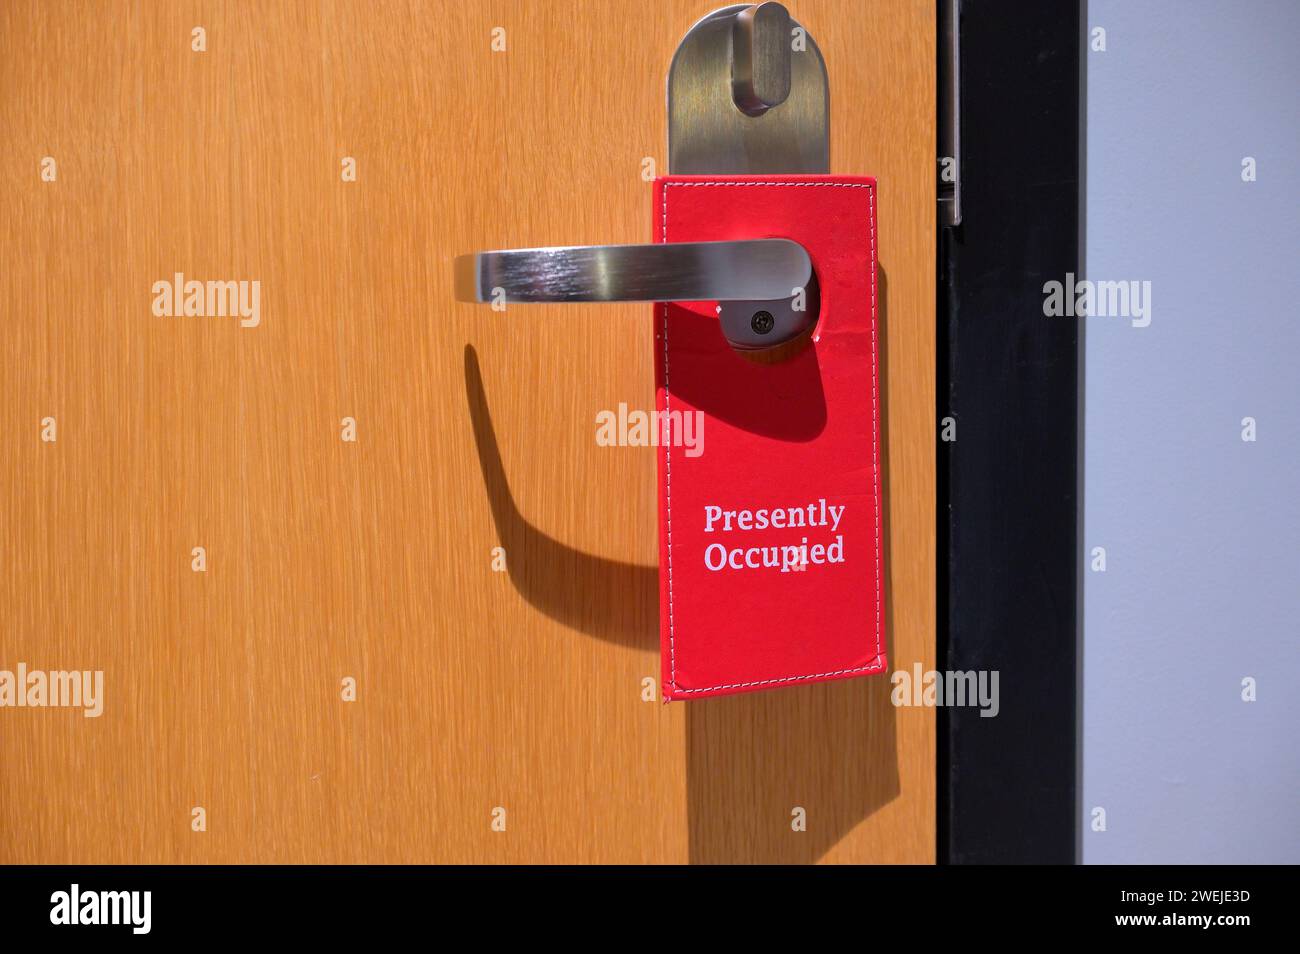 Presently Occupied - do not disturb sign on a guest room Stock Photo